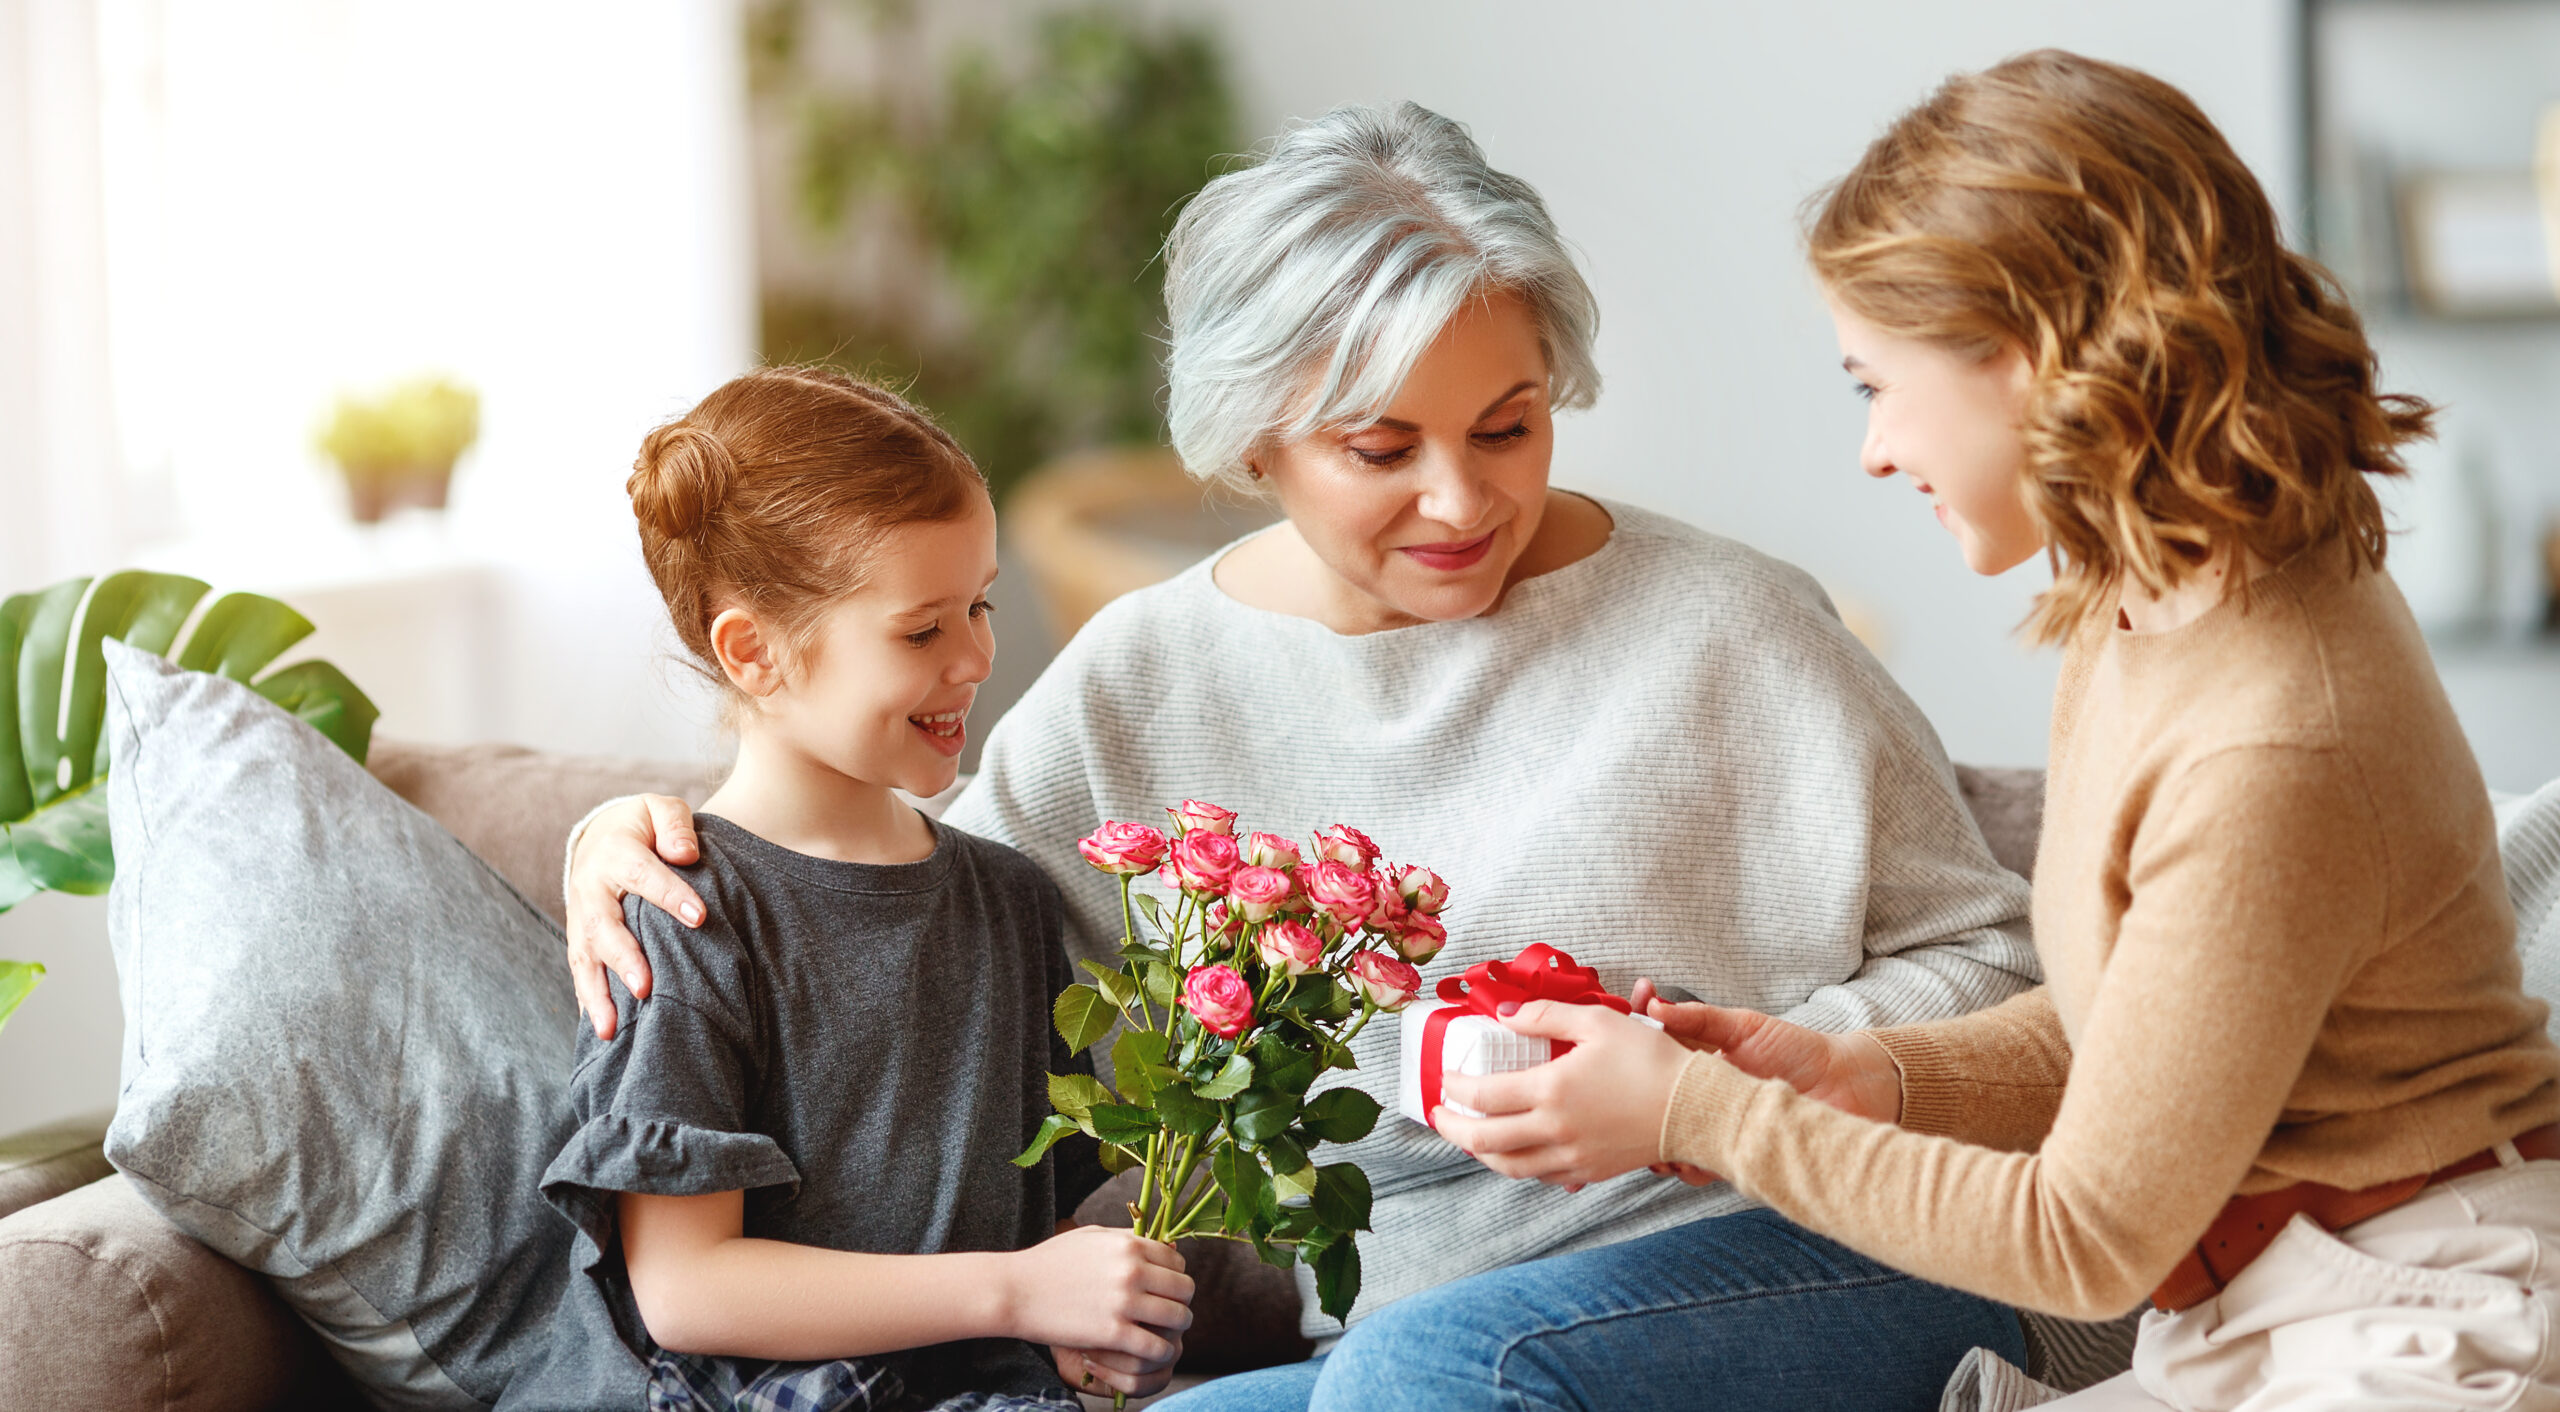 What are the best Mother’s Day gifts for moms living in a senior living community? Check out these great ideas!